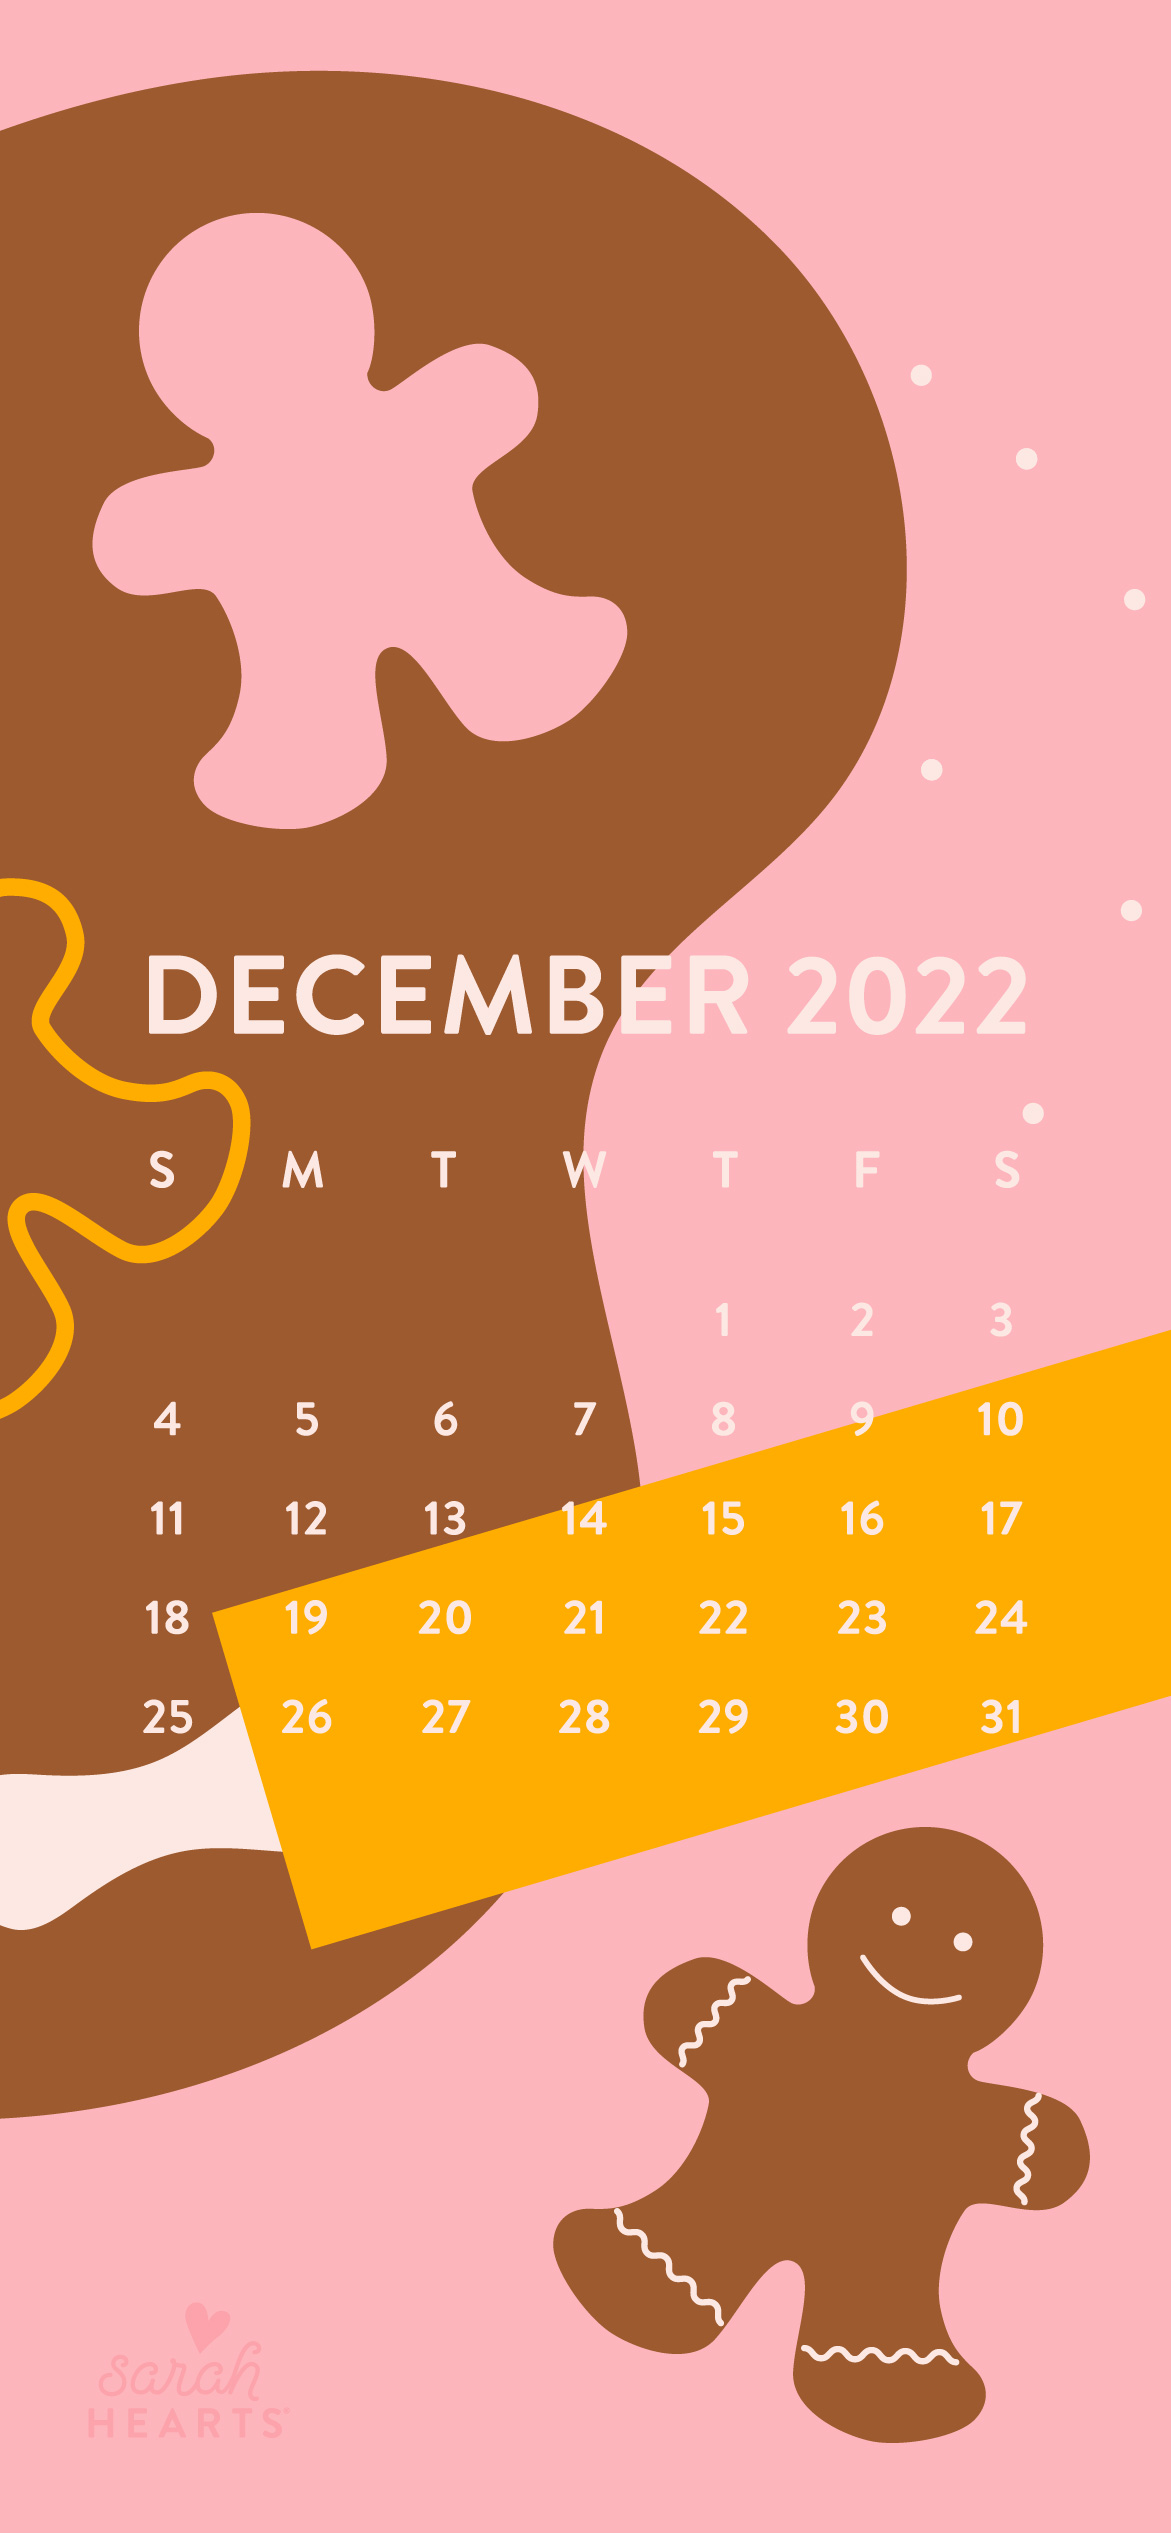 Month wise Calender Wallpapers 2023  HD Calendar Wallpapers